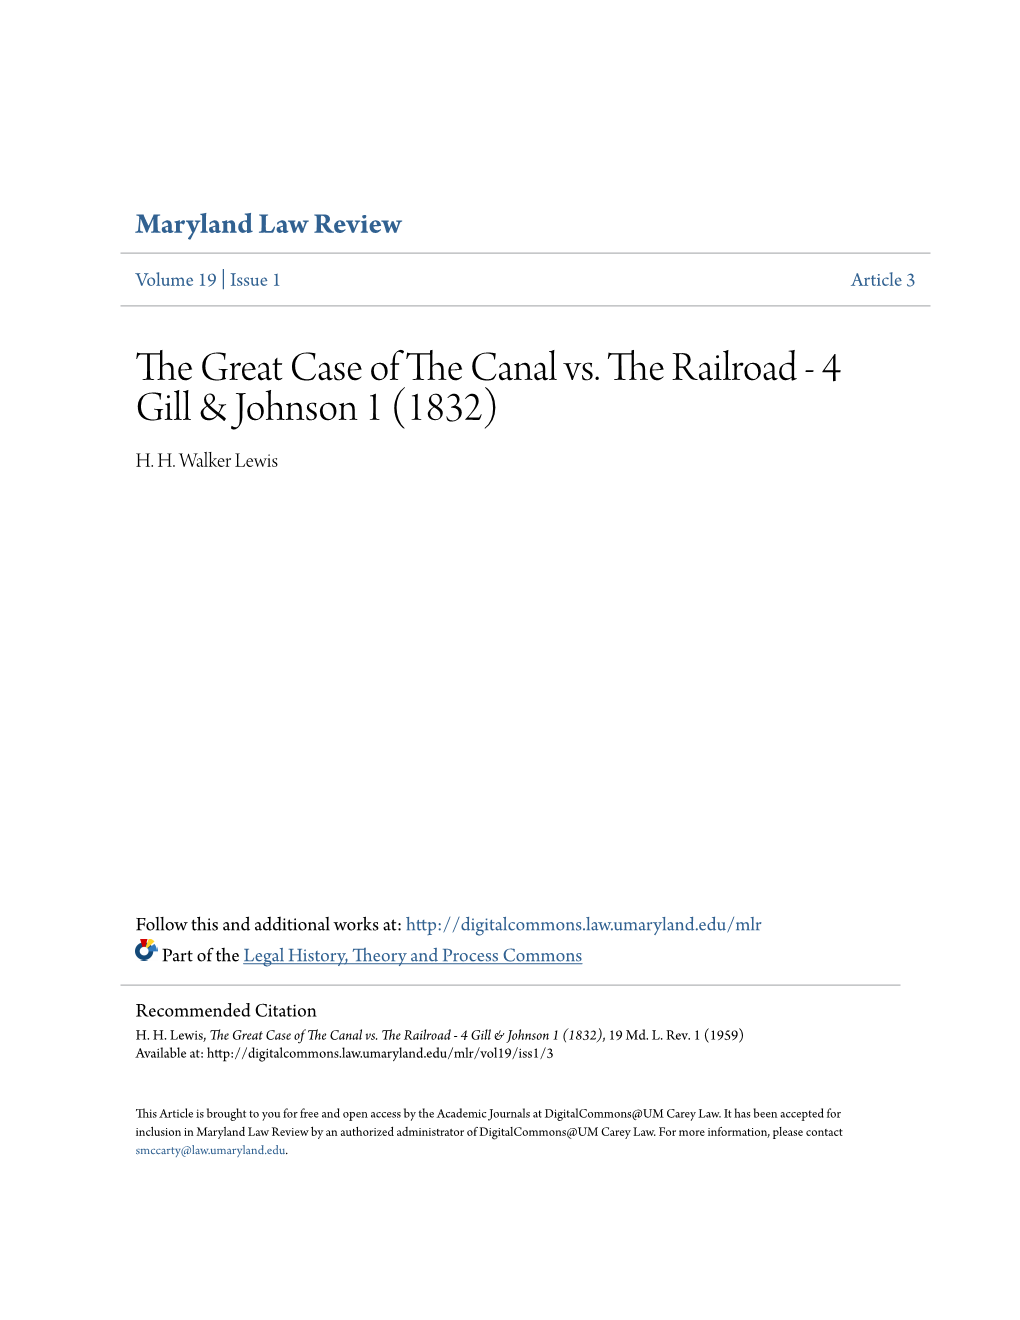 The Great Case of the Canal Vs. the Railroad - 4 Gill & Johnson 1 (1832), 19 Md